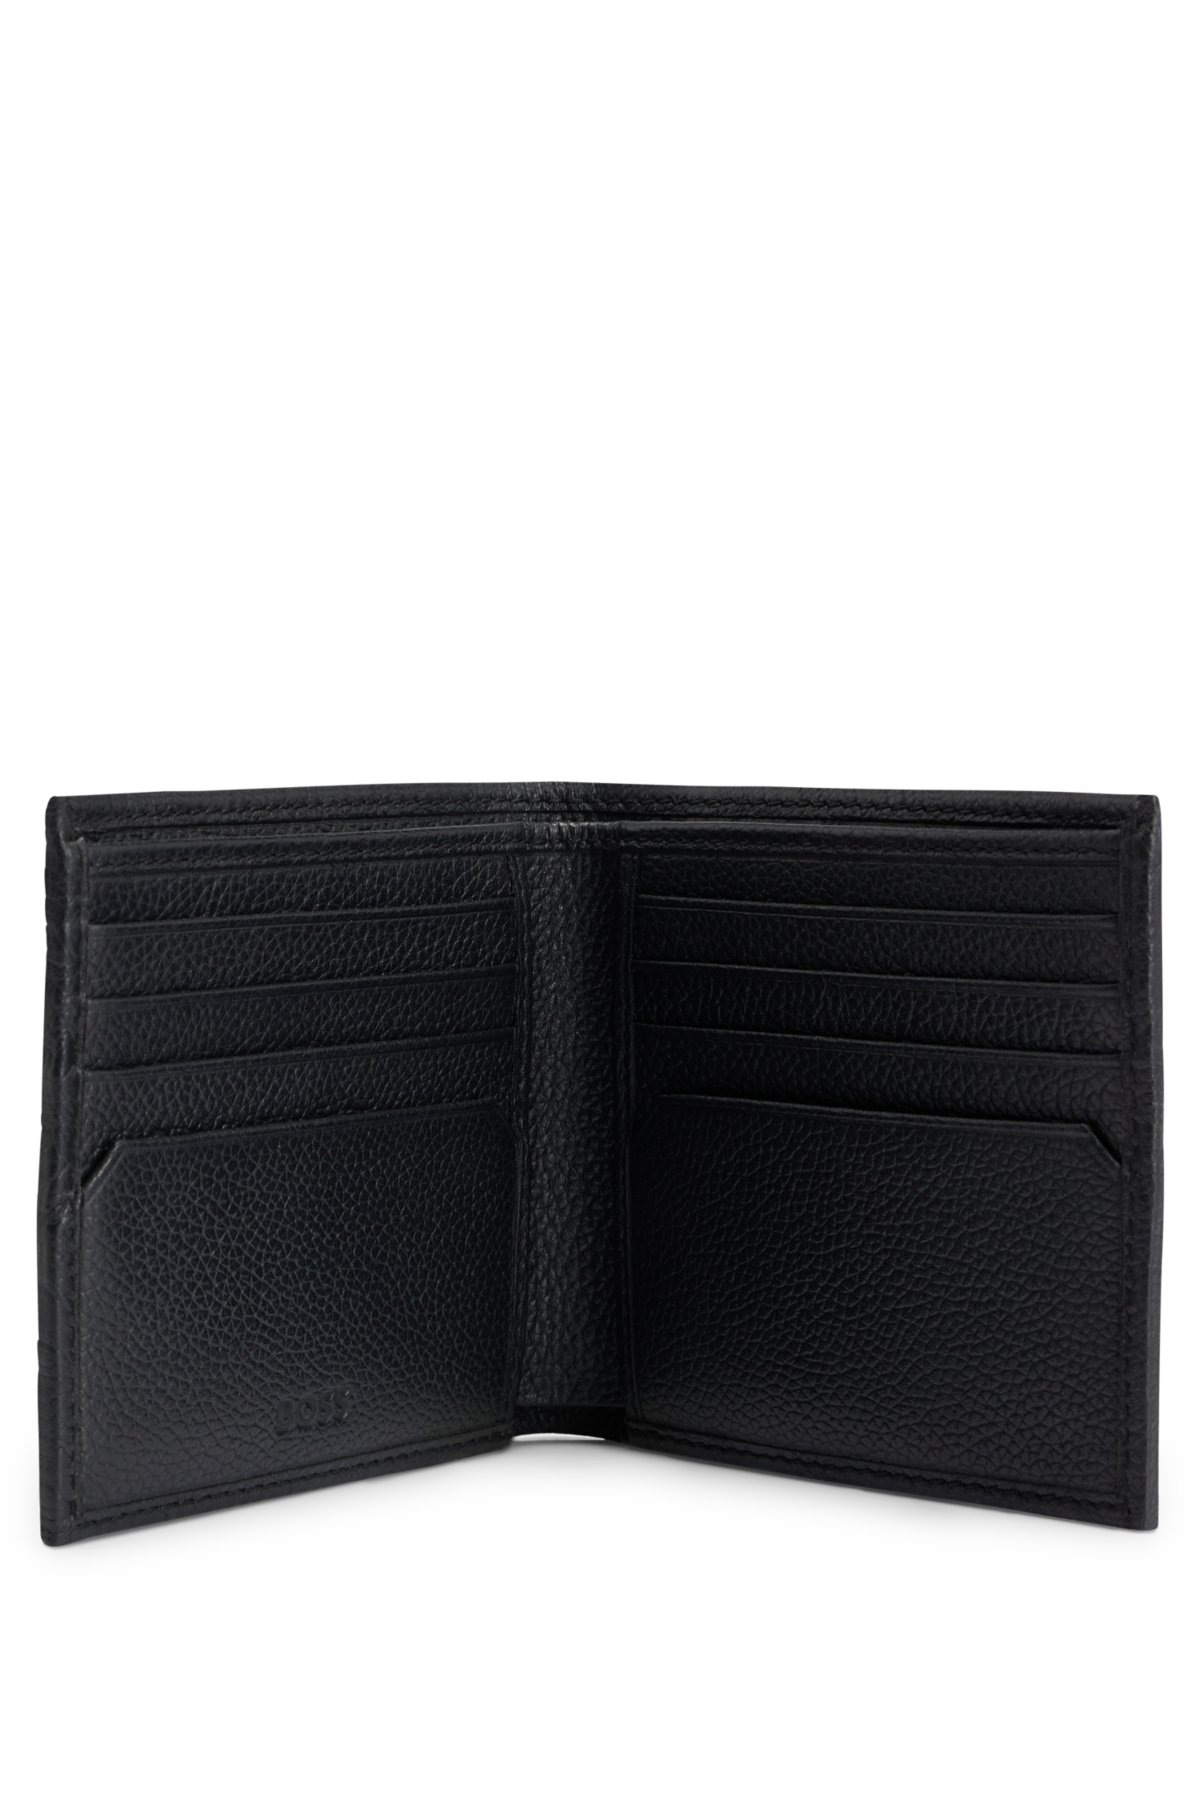 Wallet with embossed Gucci logo in black leather